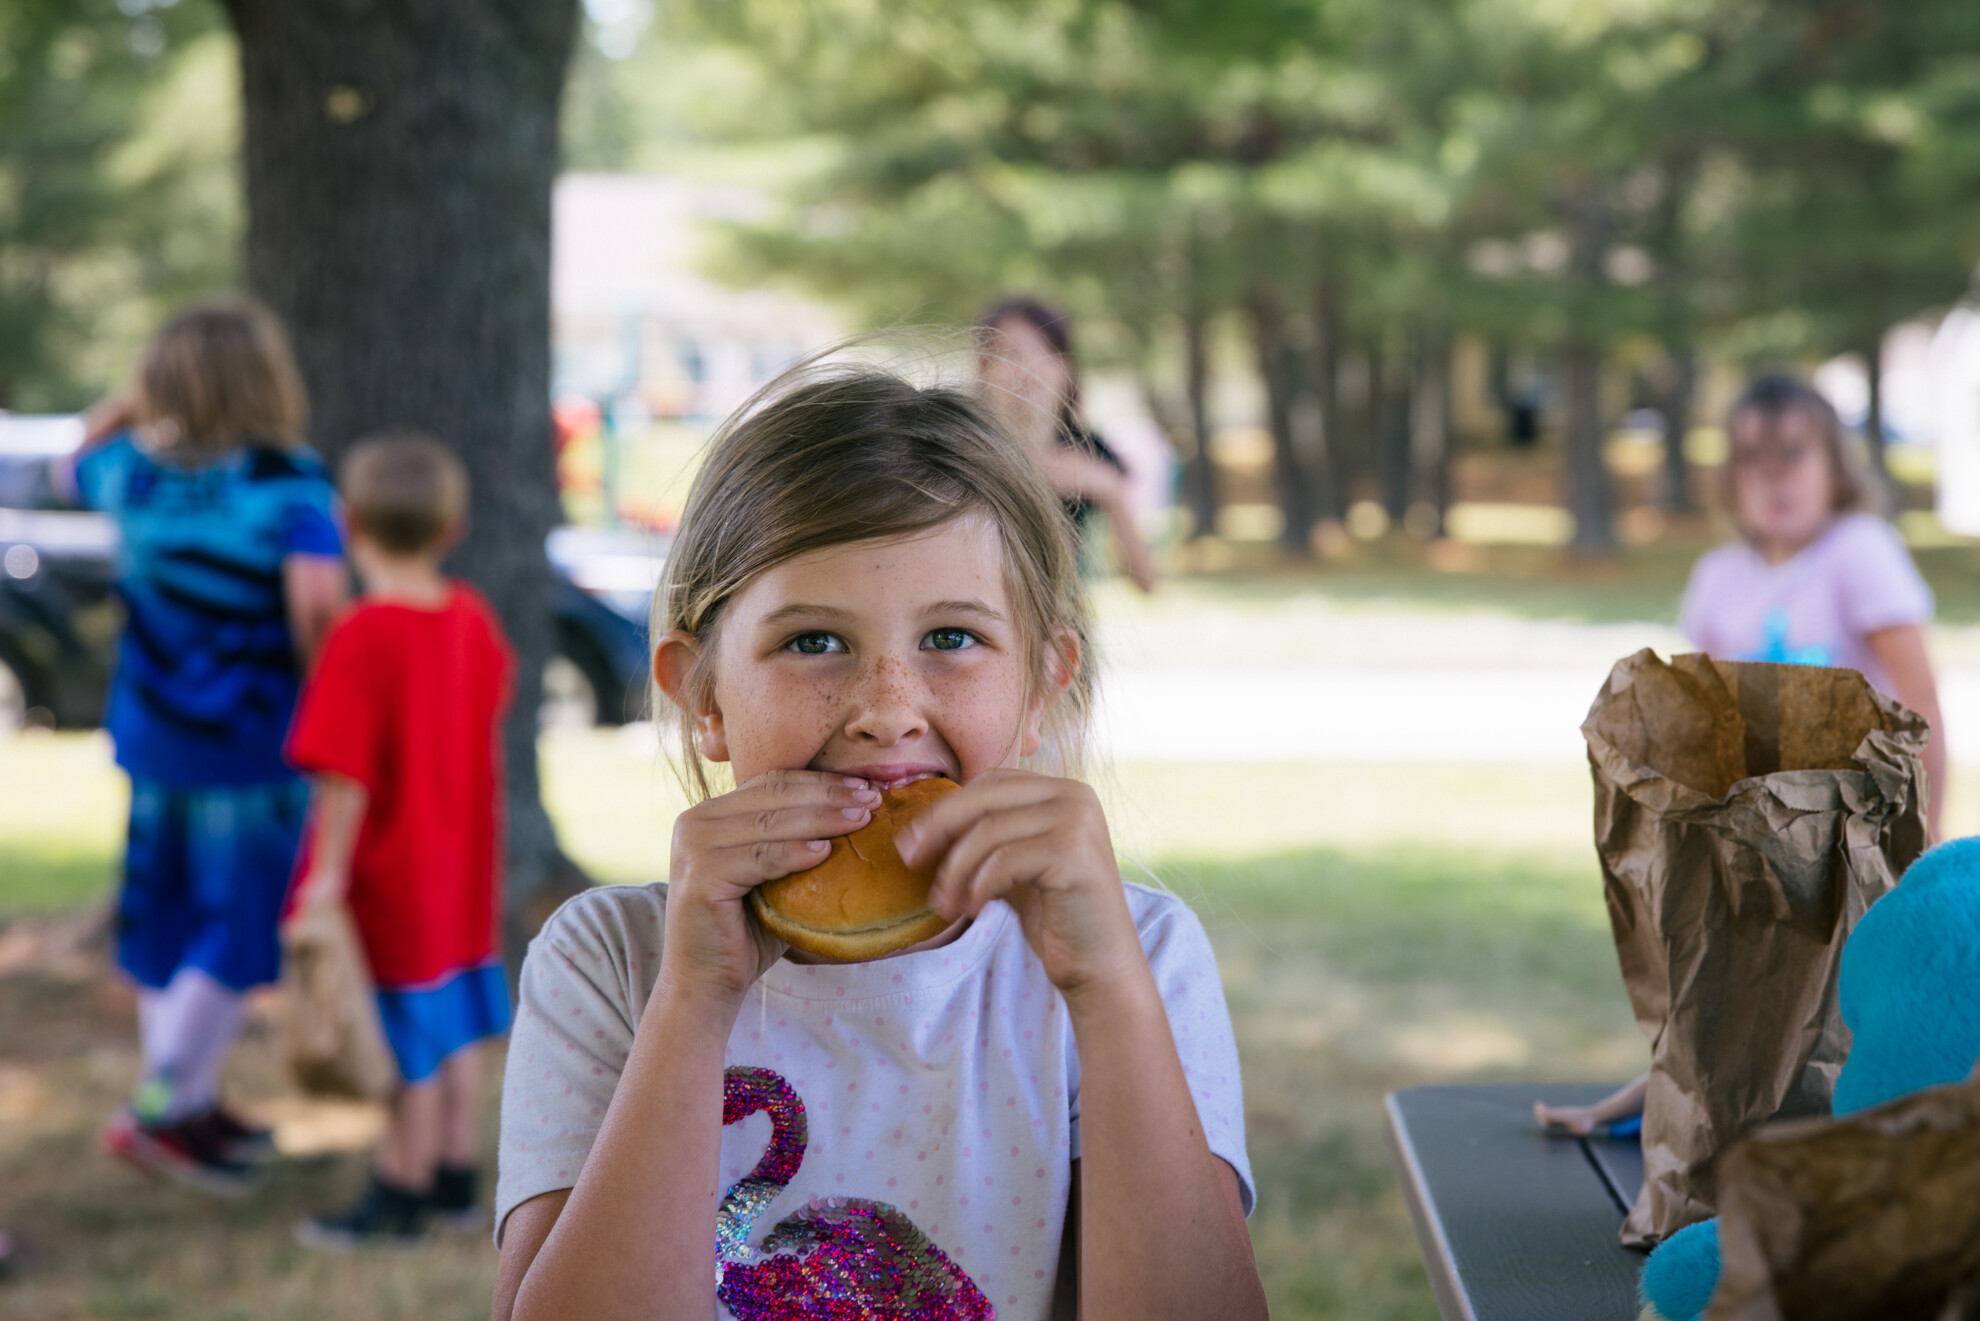 Makaila, a 9 -year-old girl, eats a turkey sandwich in a park with kids playing in the background. 